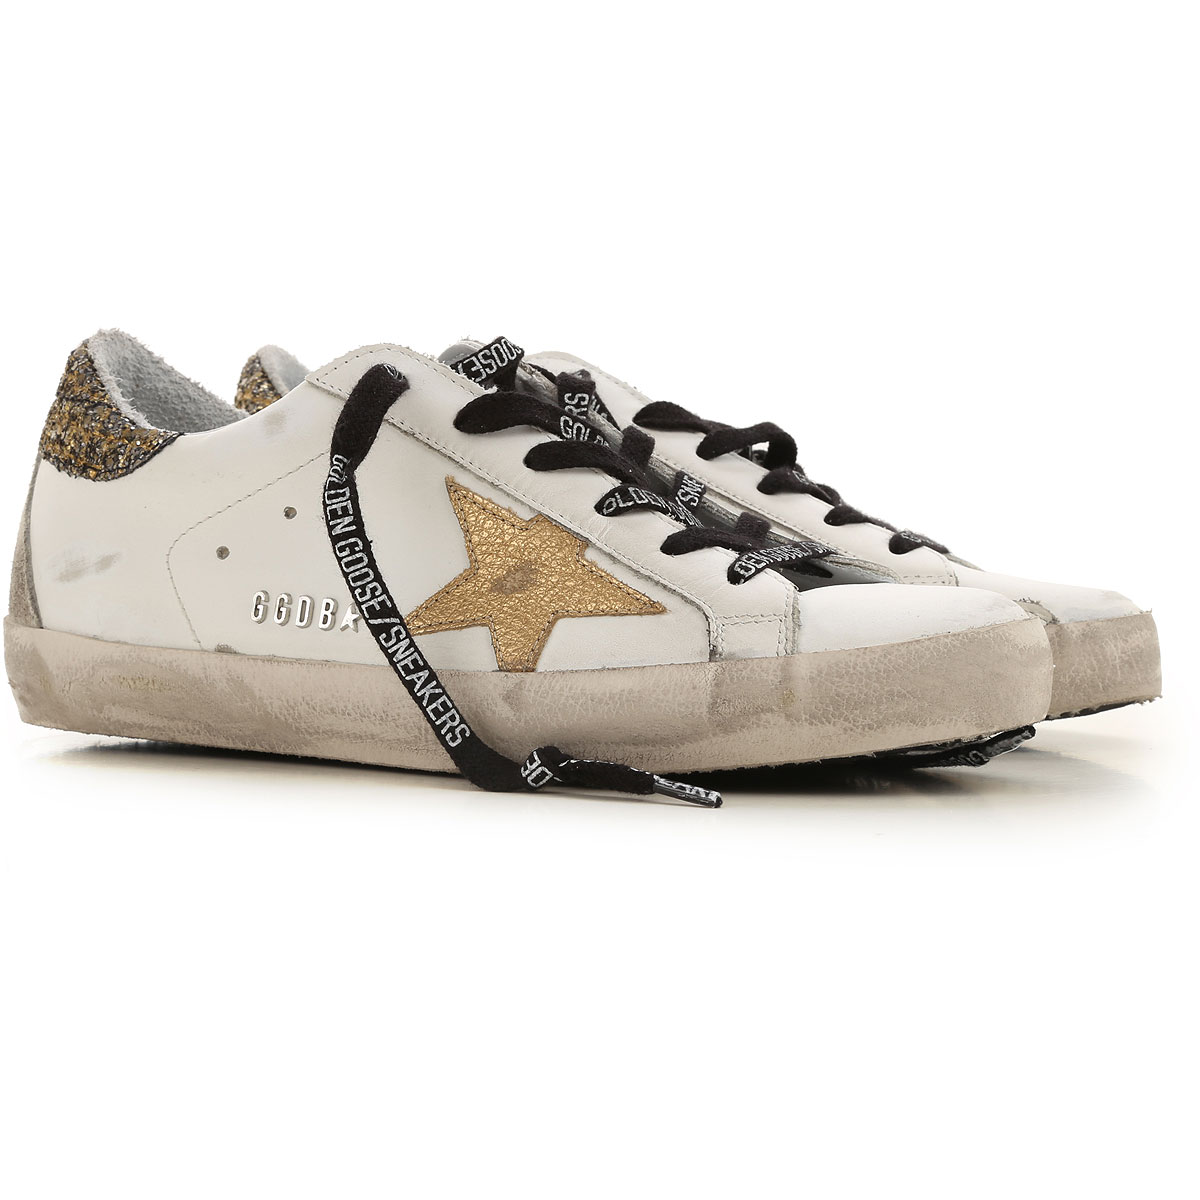 Womens Shoes Golden Goose, Style code: g36ws590-s92-superstar